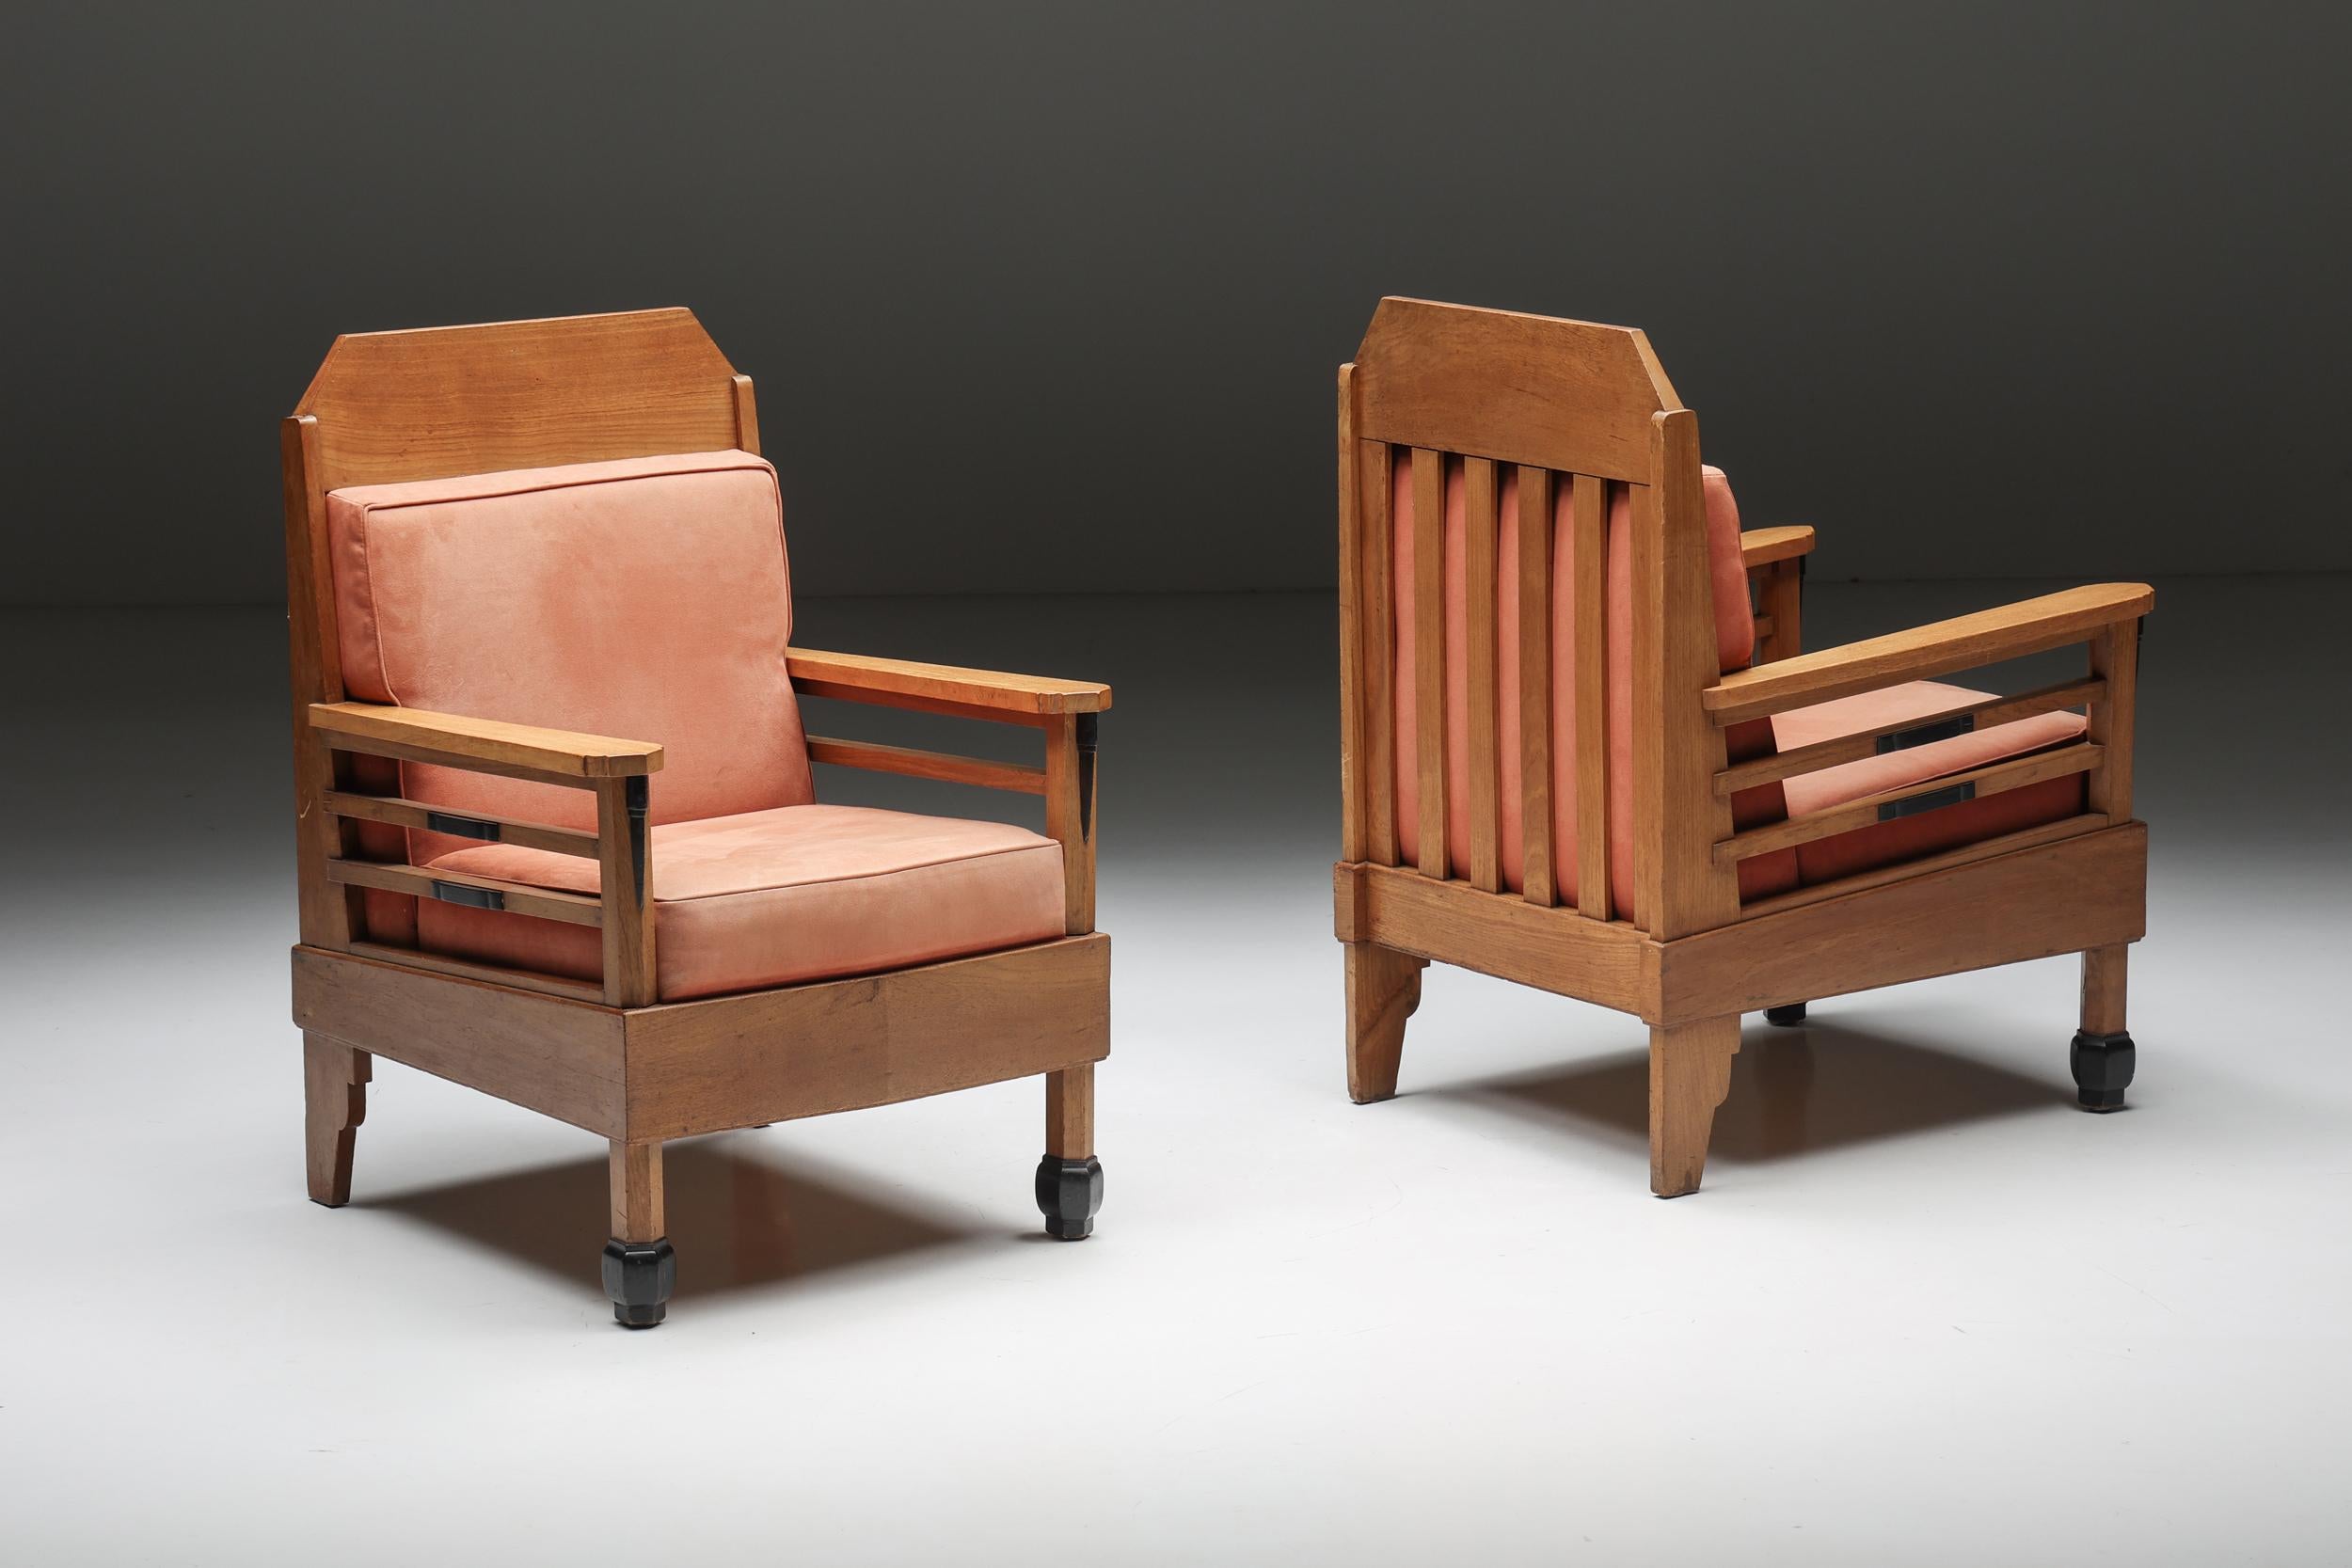 Art Deco; Pine; leather; club chairs; Europe; 1960s; Pink; Wood; Geometric Shape; 

Pair of Art Deco pine and leather club chairs made in Europe, 1960s. These chairs are made of a solid pine frame with remarkable detailing. The seats are covered in